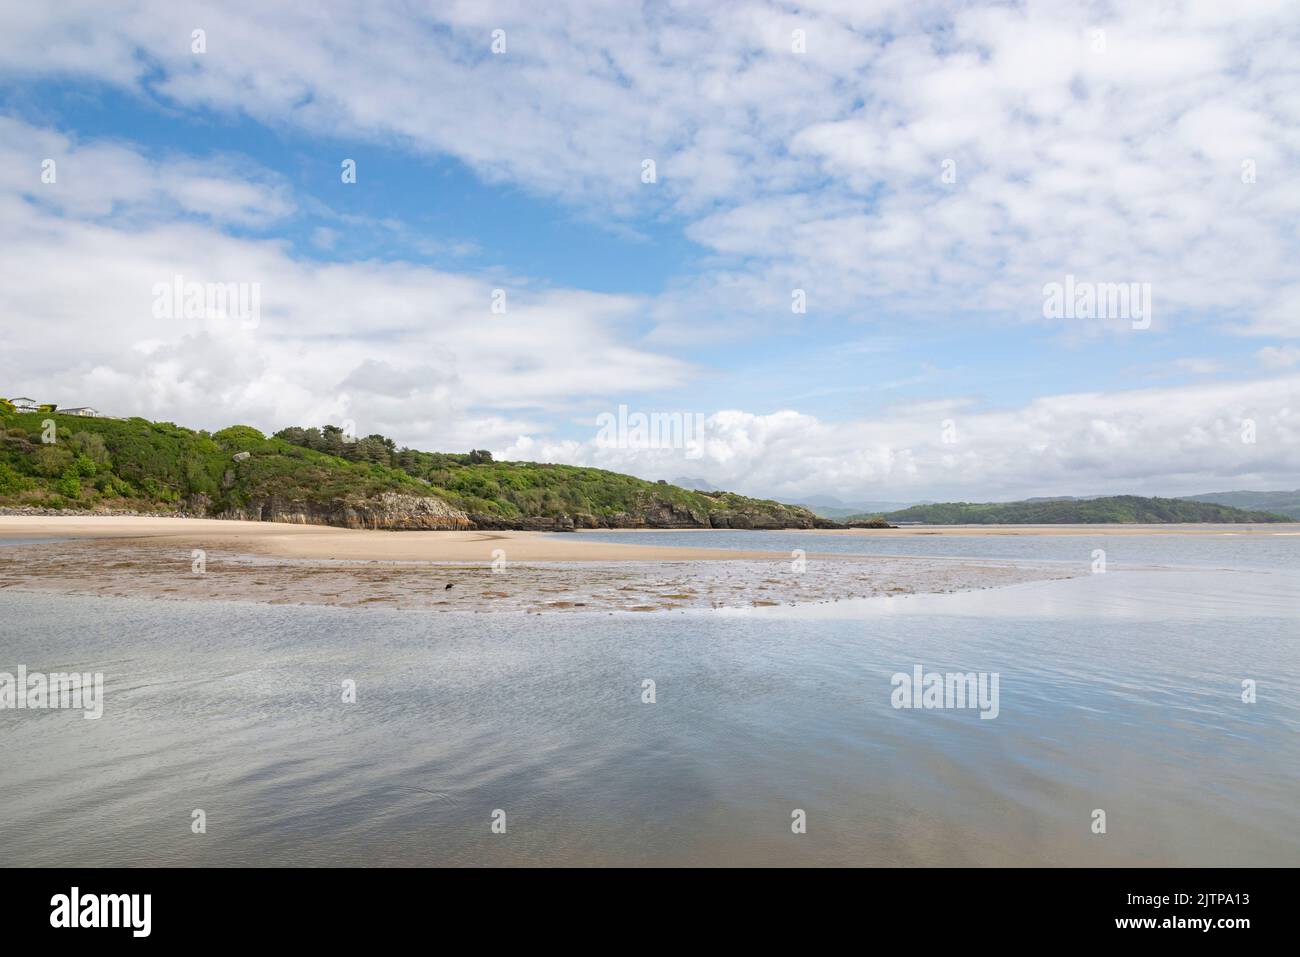 The Glaslyn Estuary between Morfa Bychan and Porthmadog on the coast of North Wales. Stock Photo